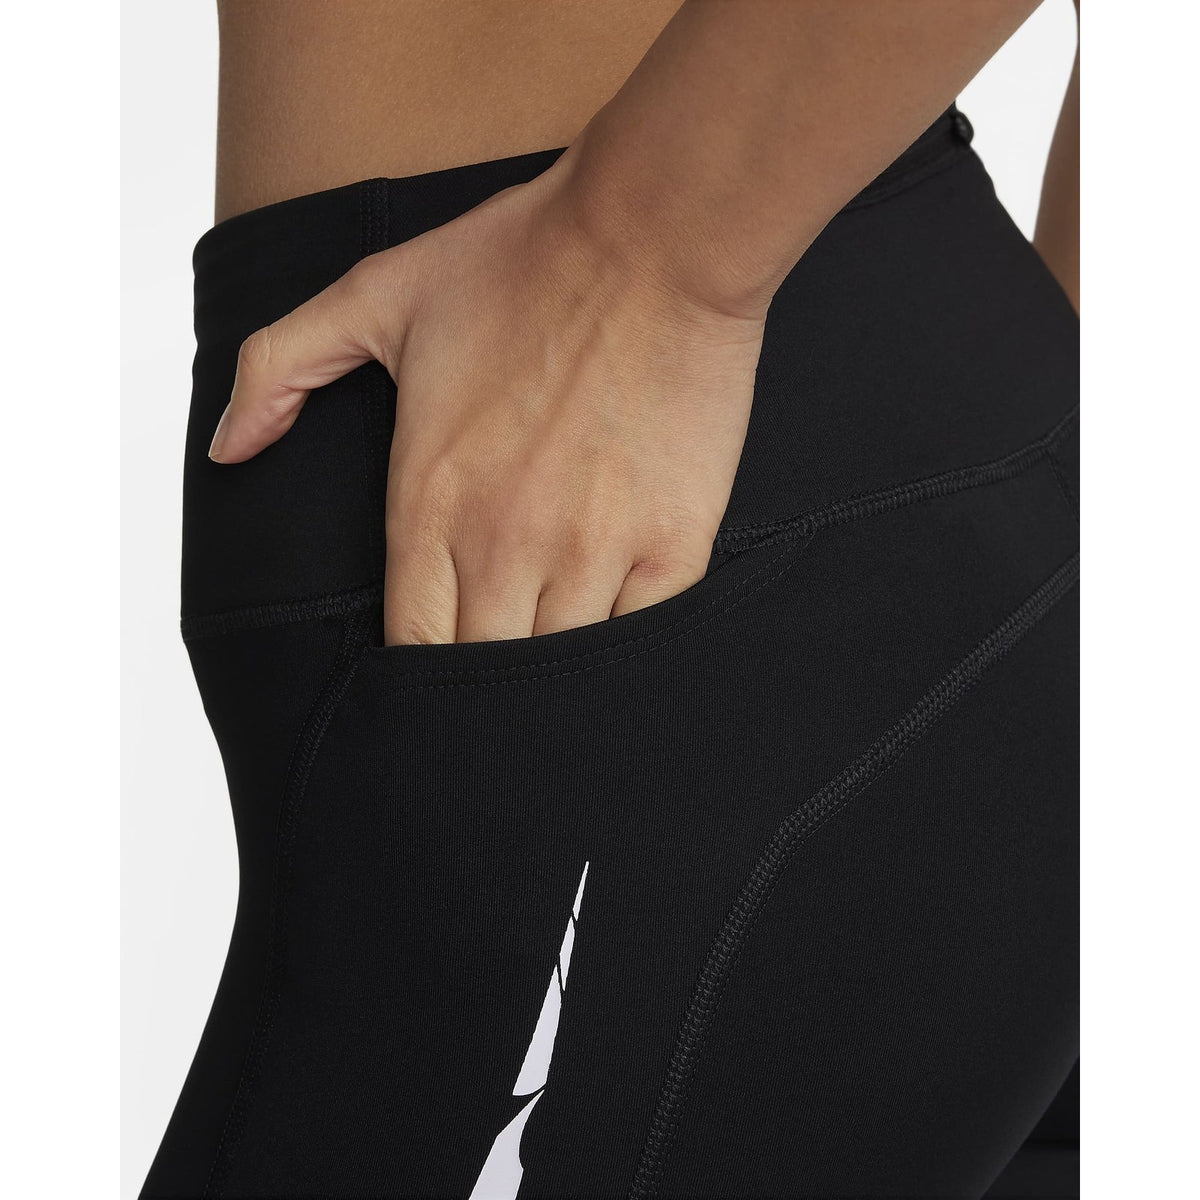 Nike Fast Mid-Rise 7/8 Running Leggings with Pockets Womens APPAREL - Womens Tights 